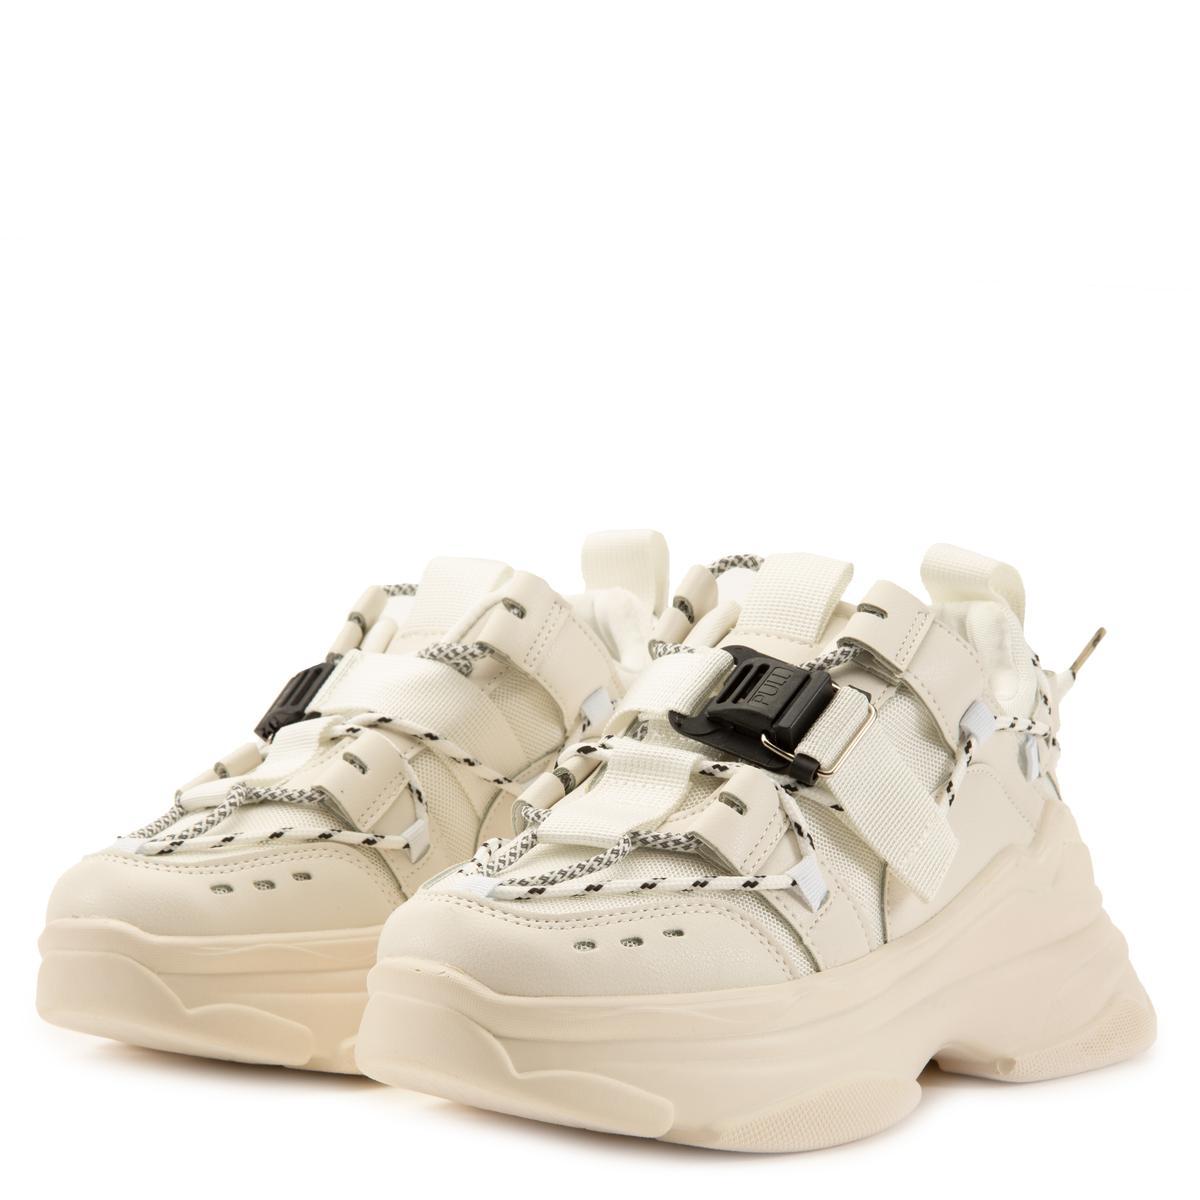 Packo-1 Lace-Up Sneakers